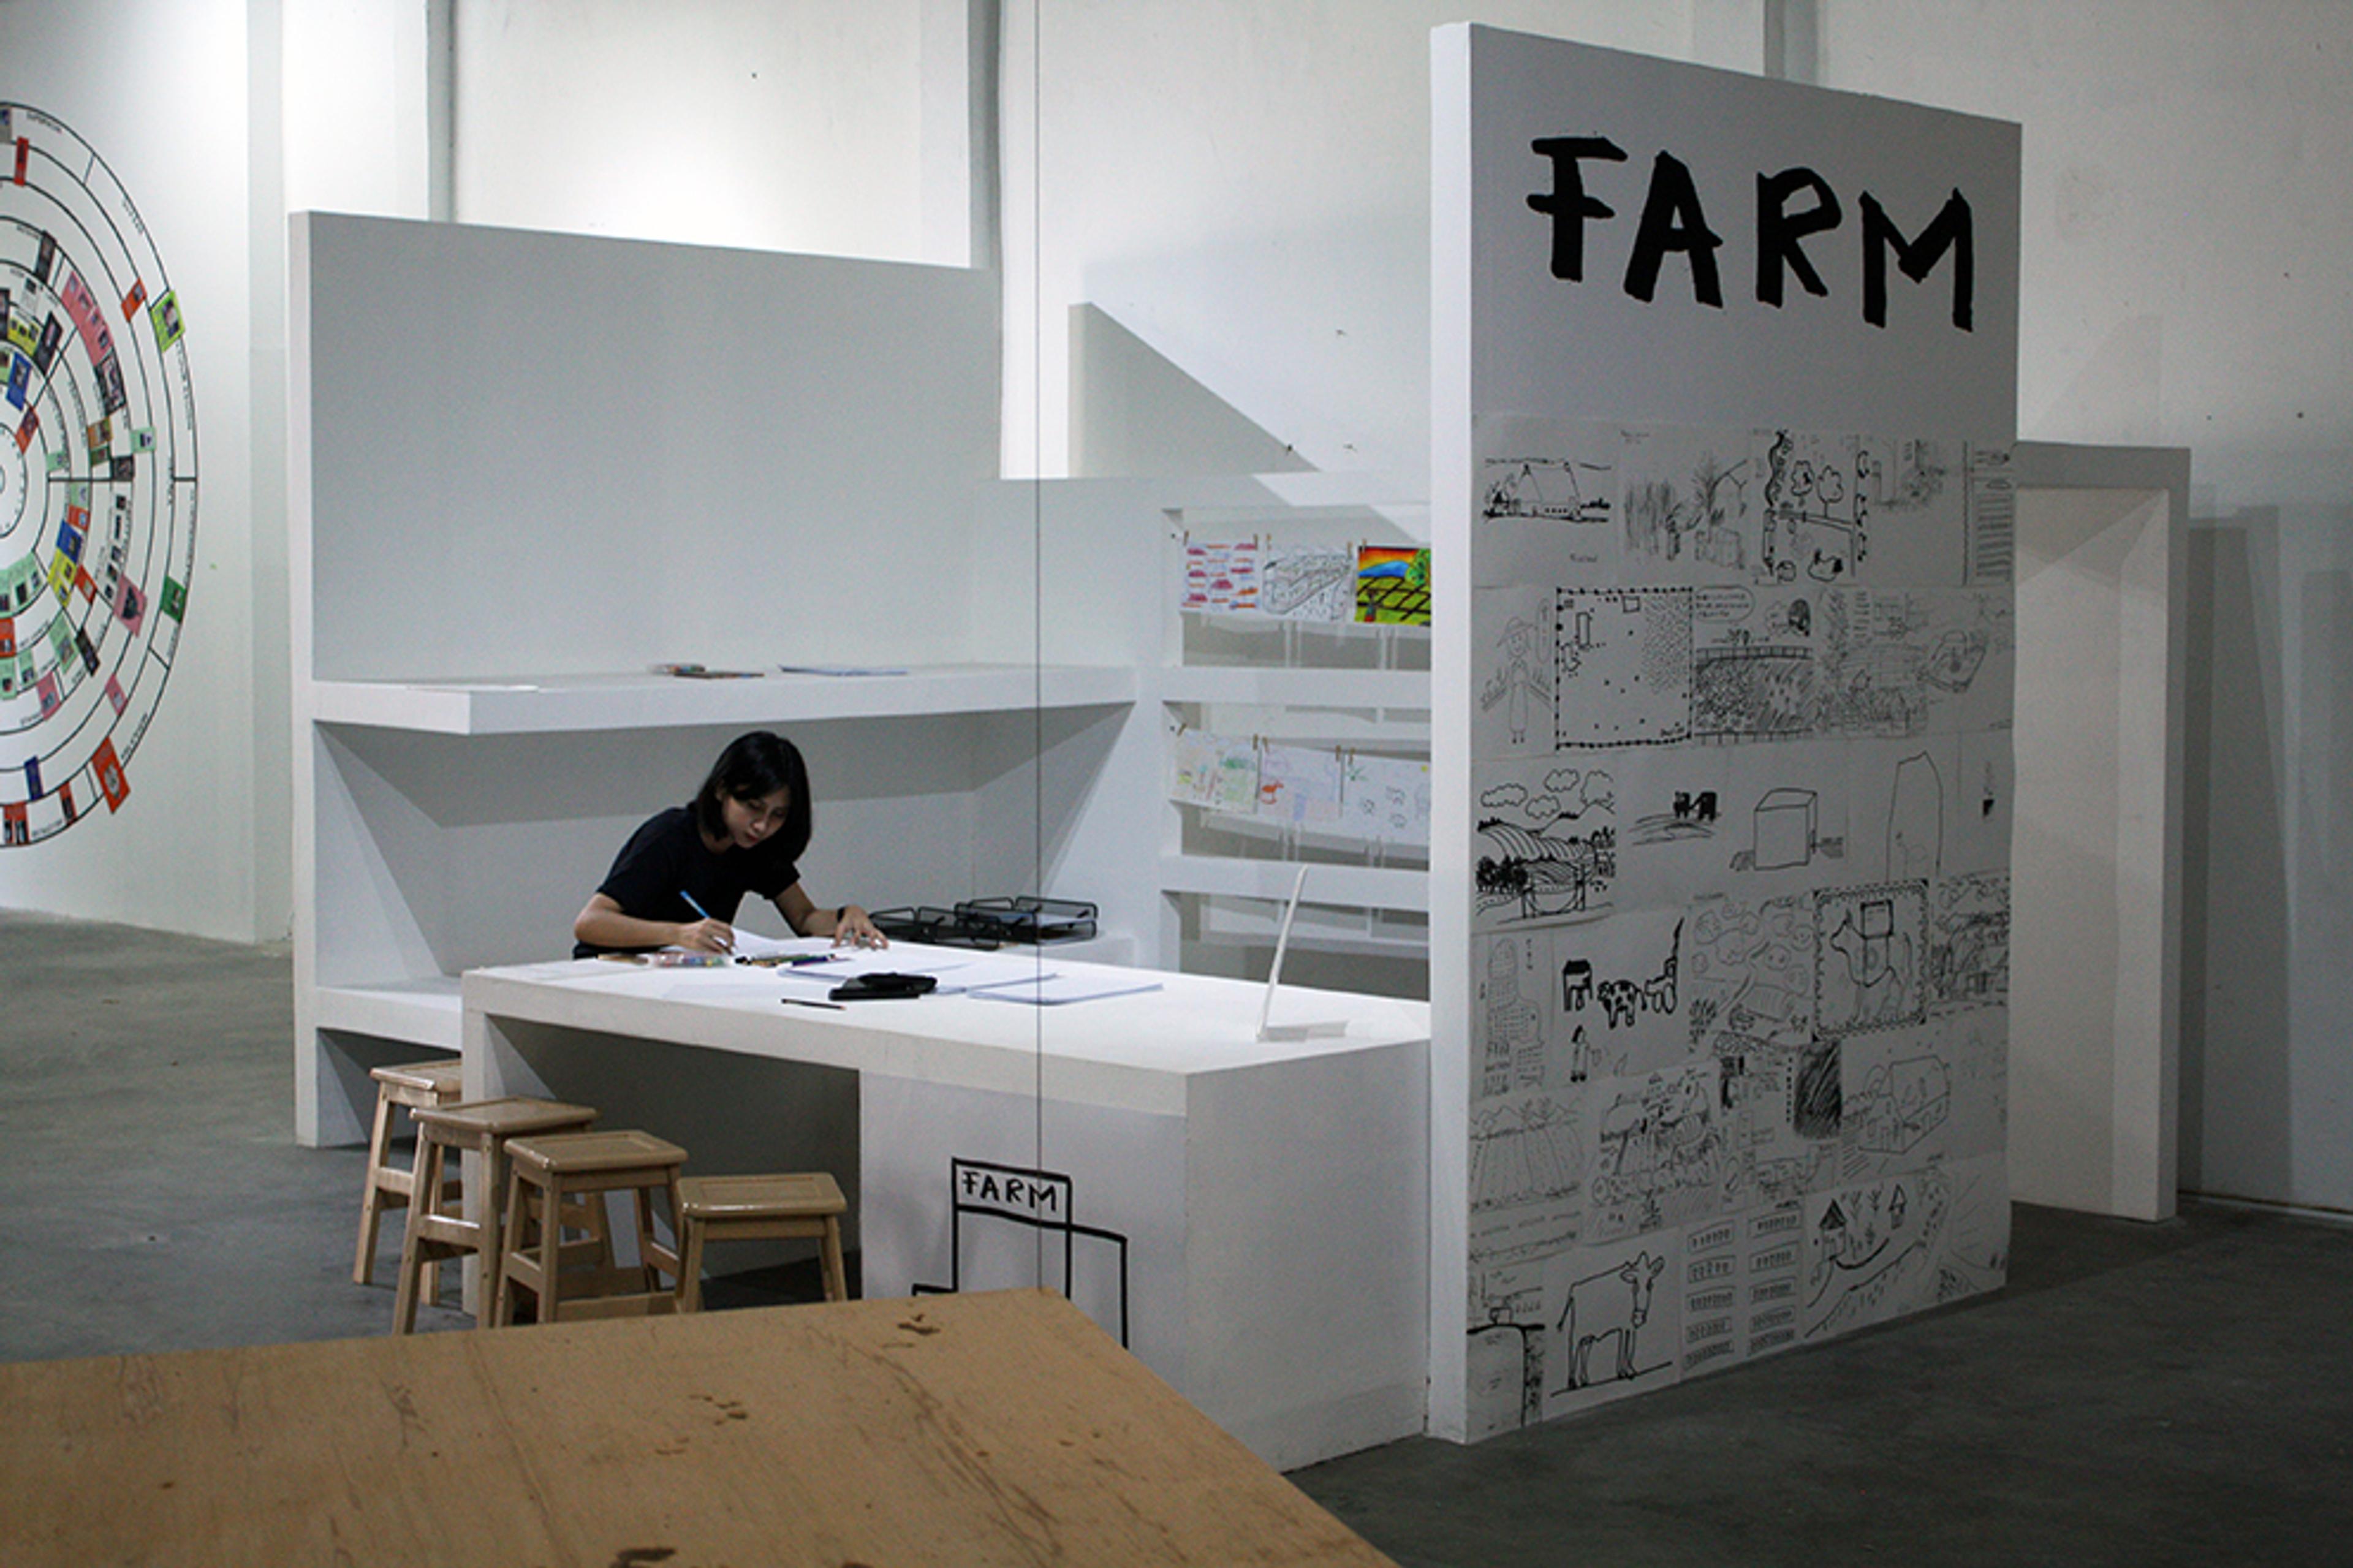 A room-size booth with three walls and a table inside, the outdoor walls are covered with handdrawings, and the word FARM is written in large letters. Inside the booth is a person sitting at the table, and drawing.